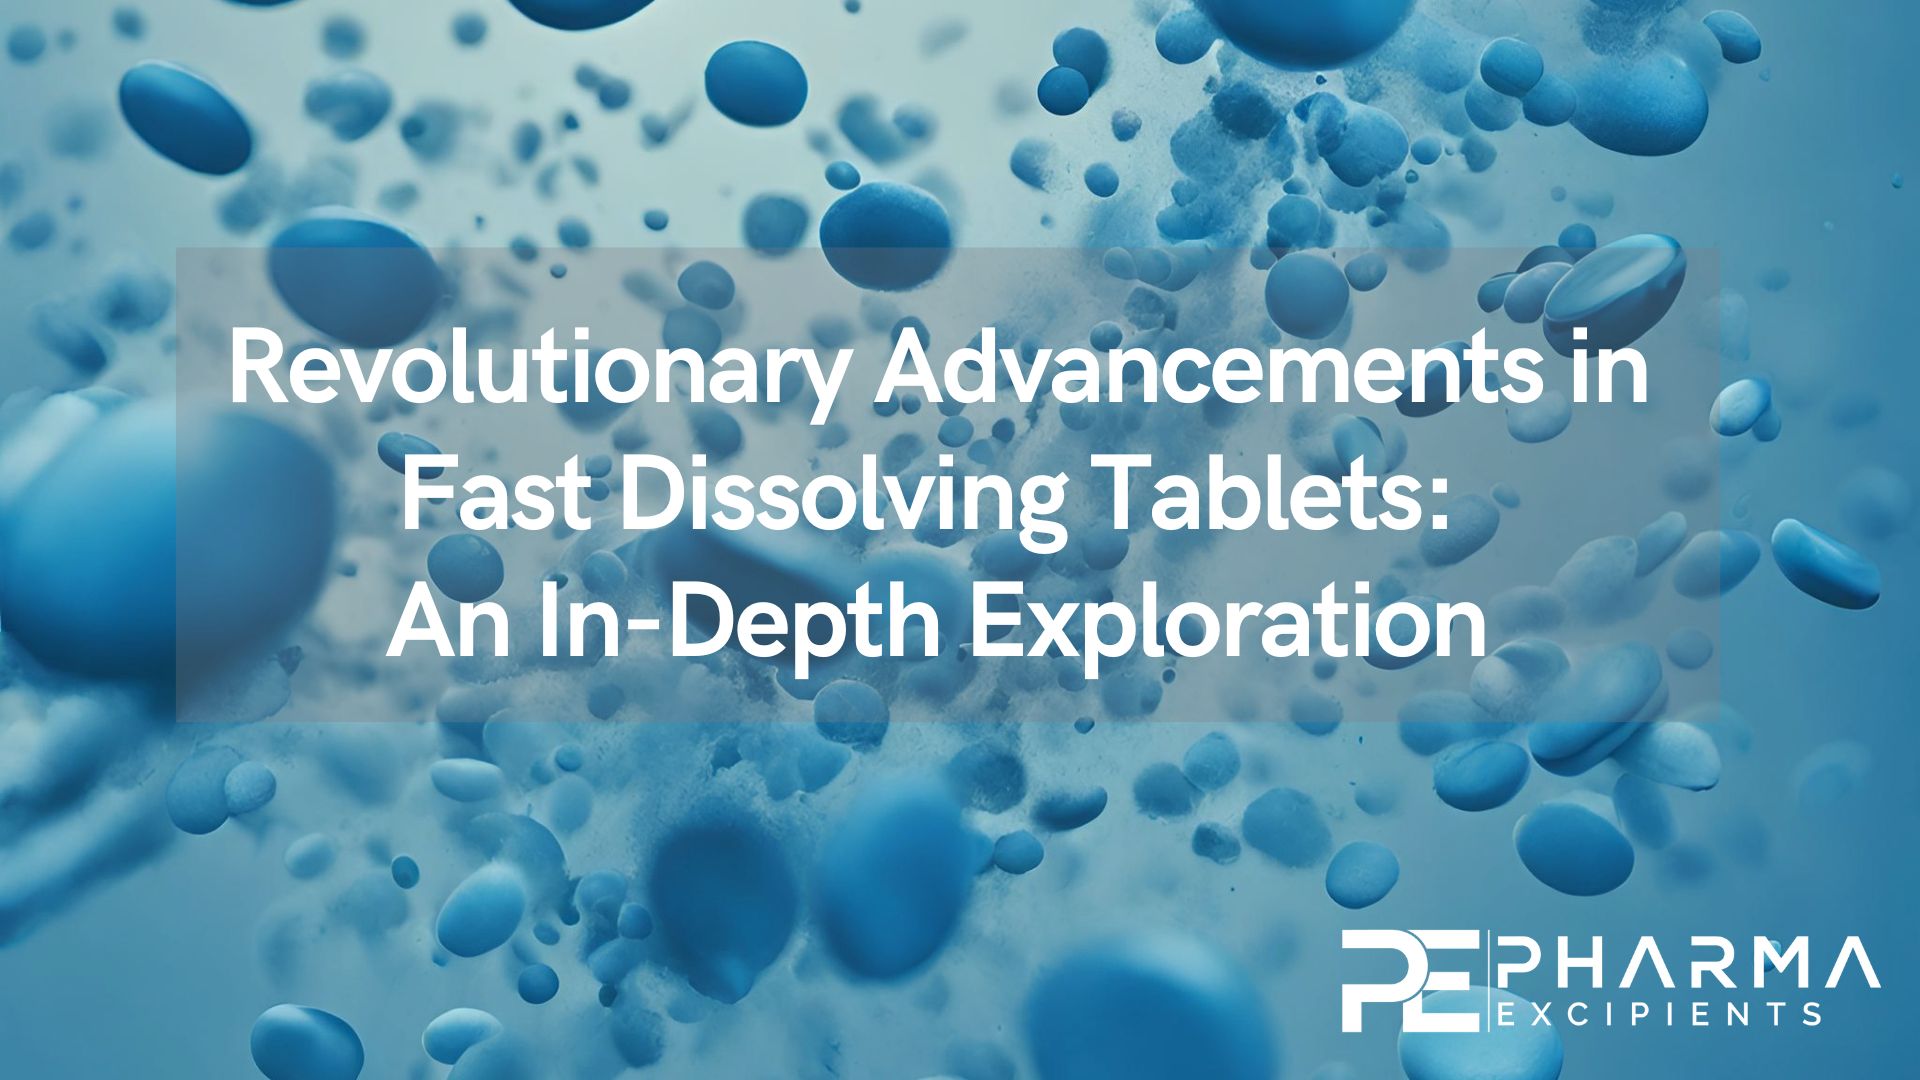 Revolutionary Advancements in Fast Dissolving Tablets - An In-Depth Exploration